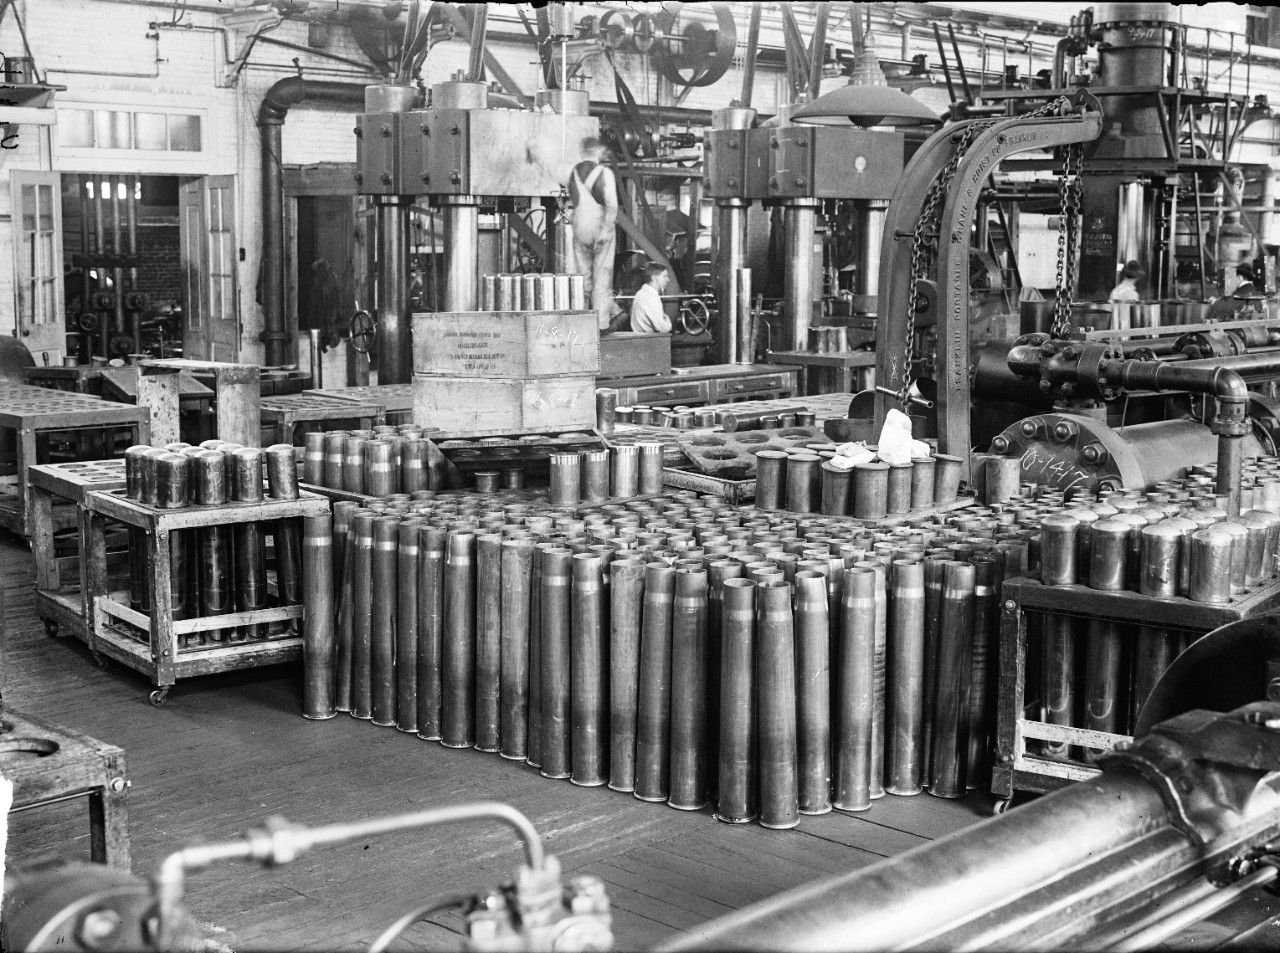 LC-DIG-H261-9916:  U.S. Naval Gun Factory, Washington Navy Yard, 1917.   Cartridge cases are shown inside one of the factory buildings.  Photographed by Harris & Ewing, 1917.   (Courtesy of the Library of Congress.   